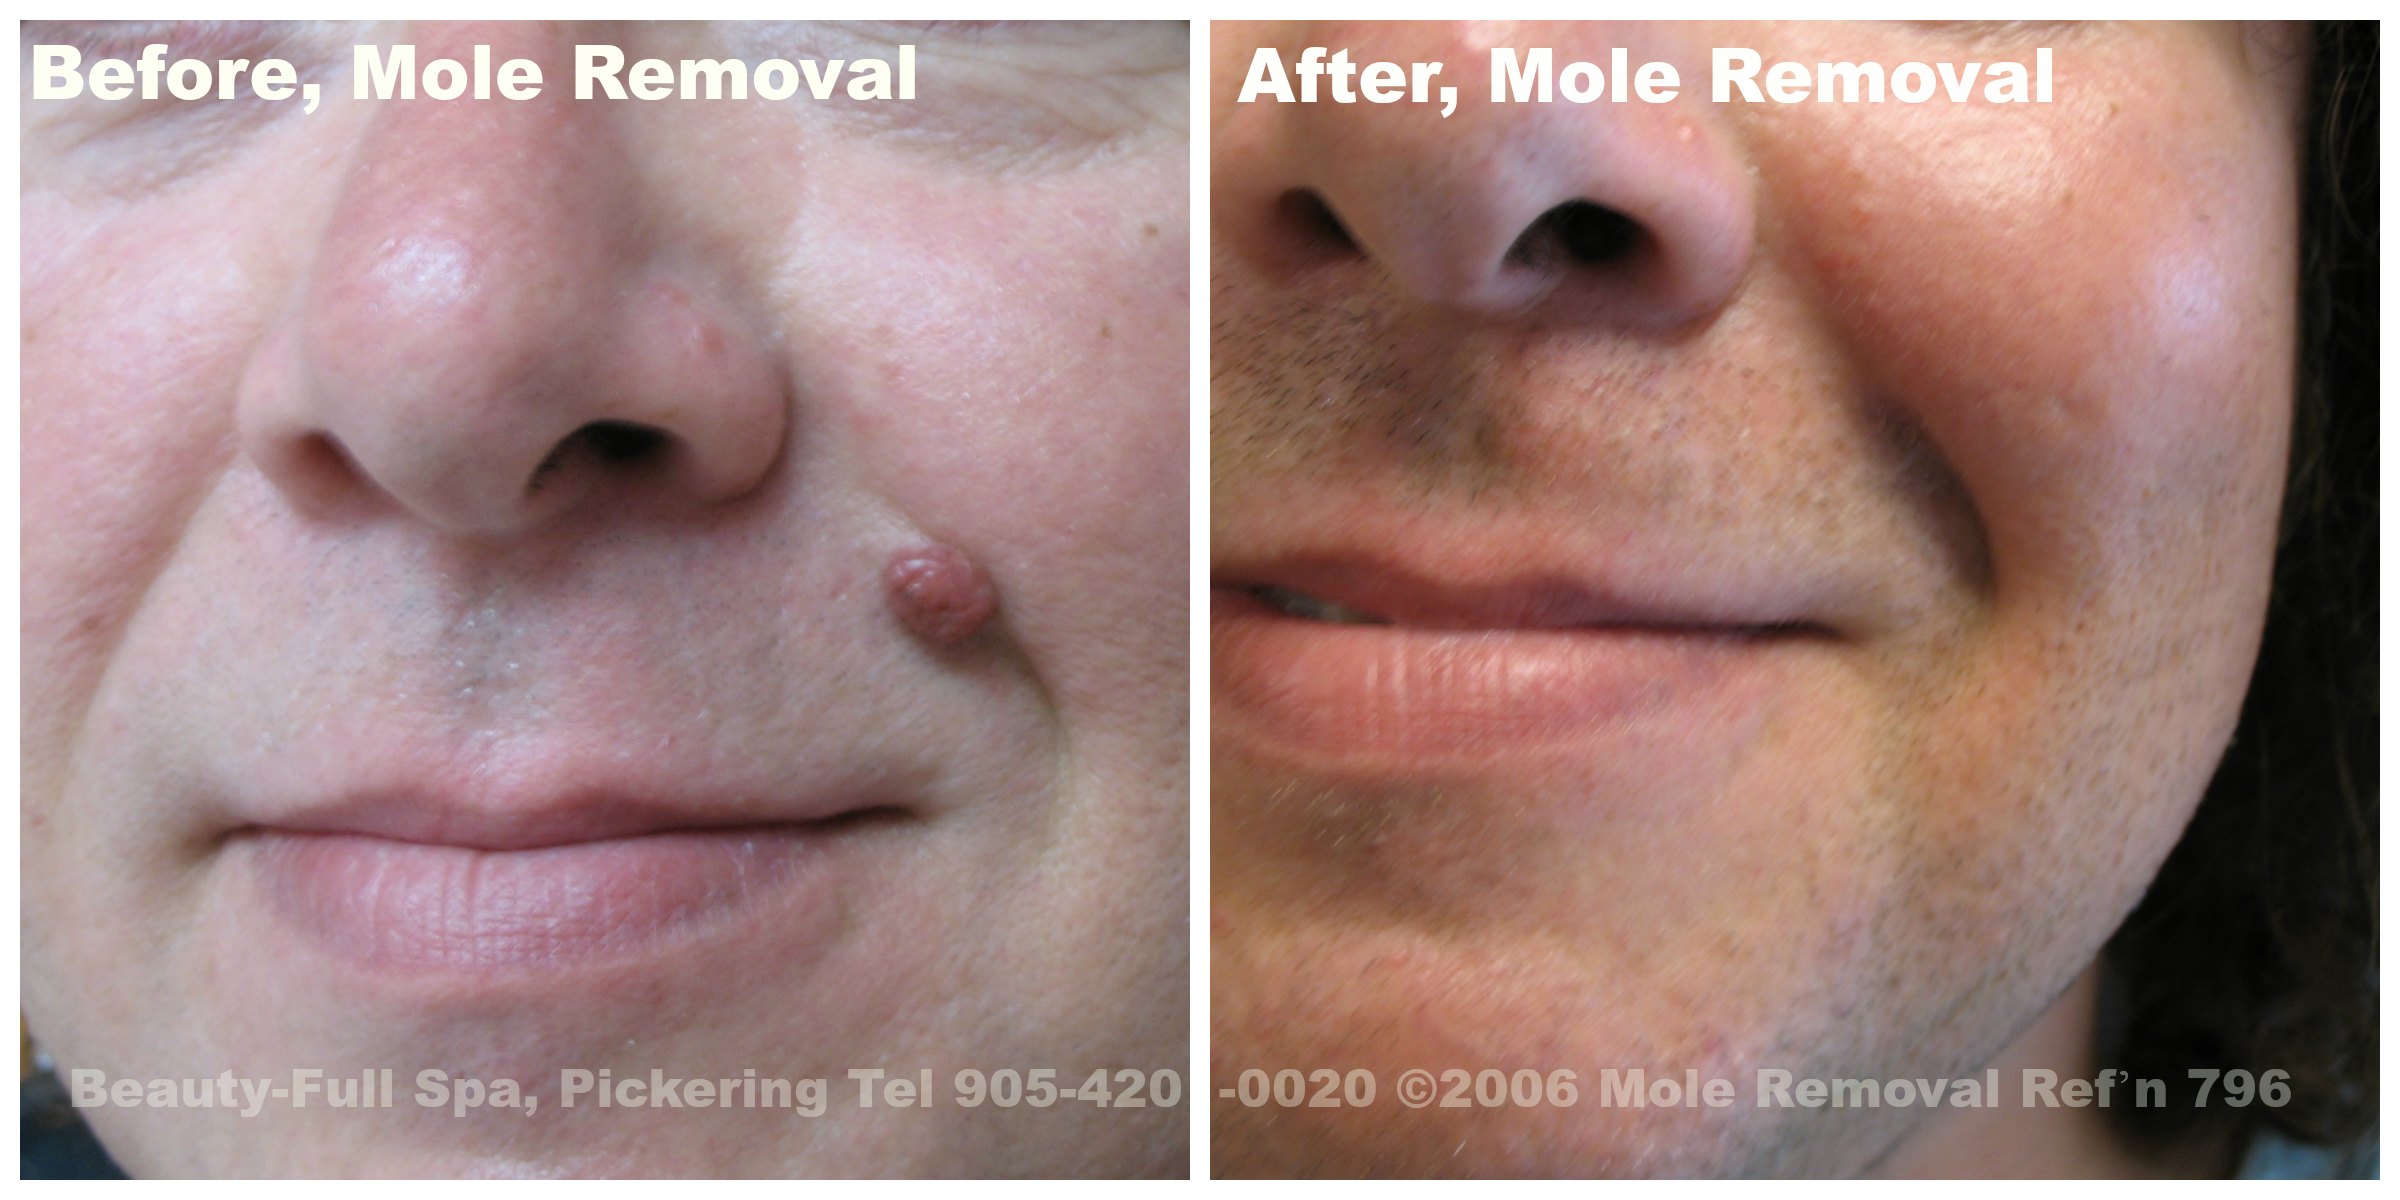 Mole Removal Before & After.